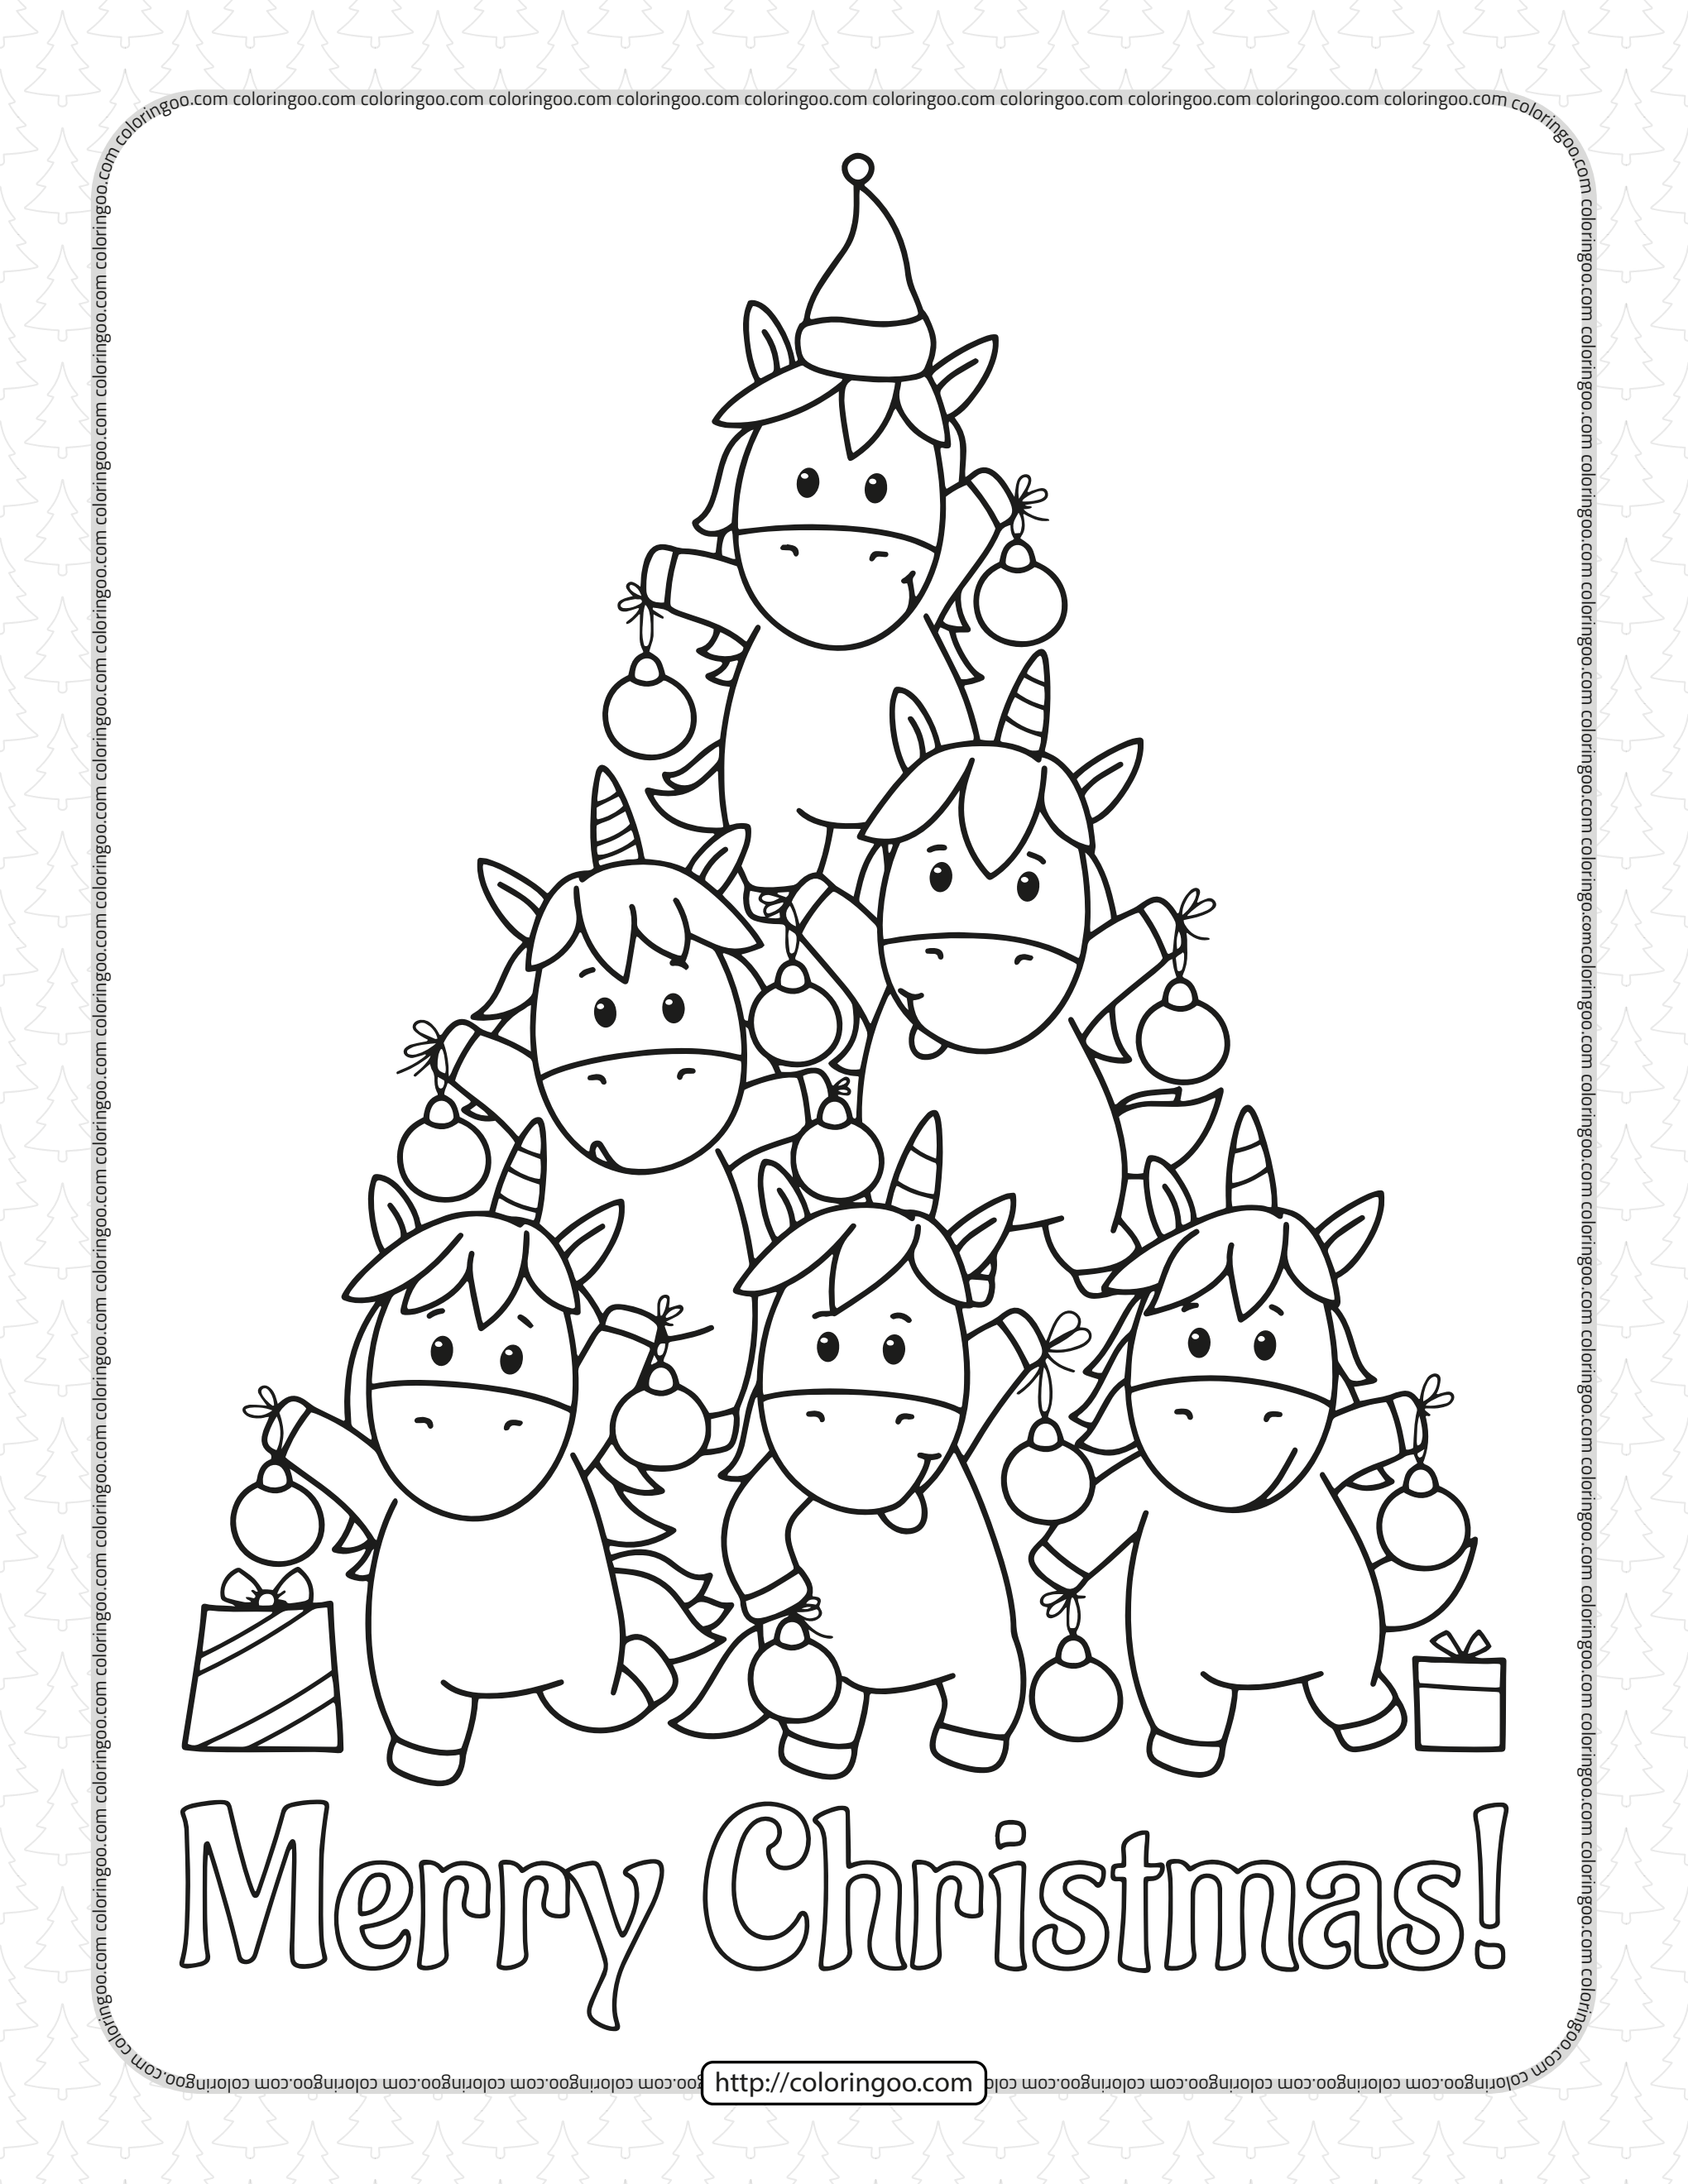 merry christmas unicorn tree coloring page